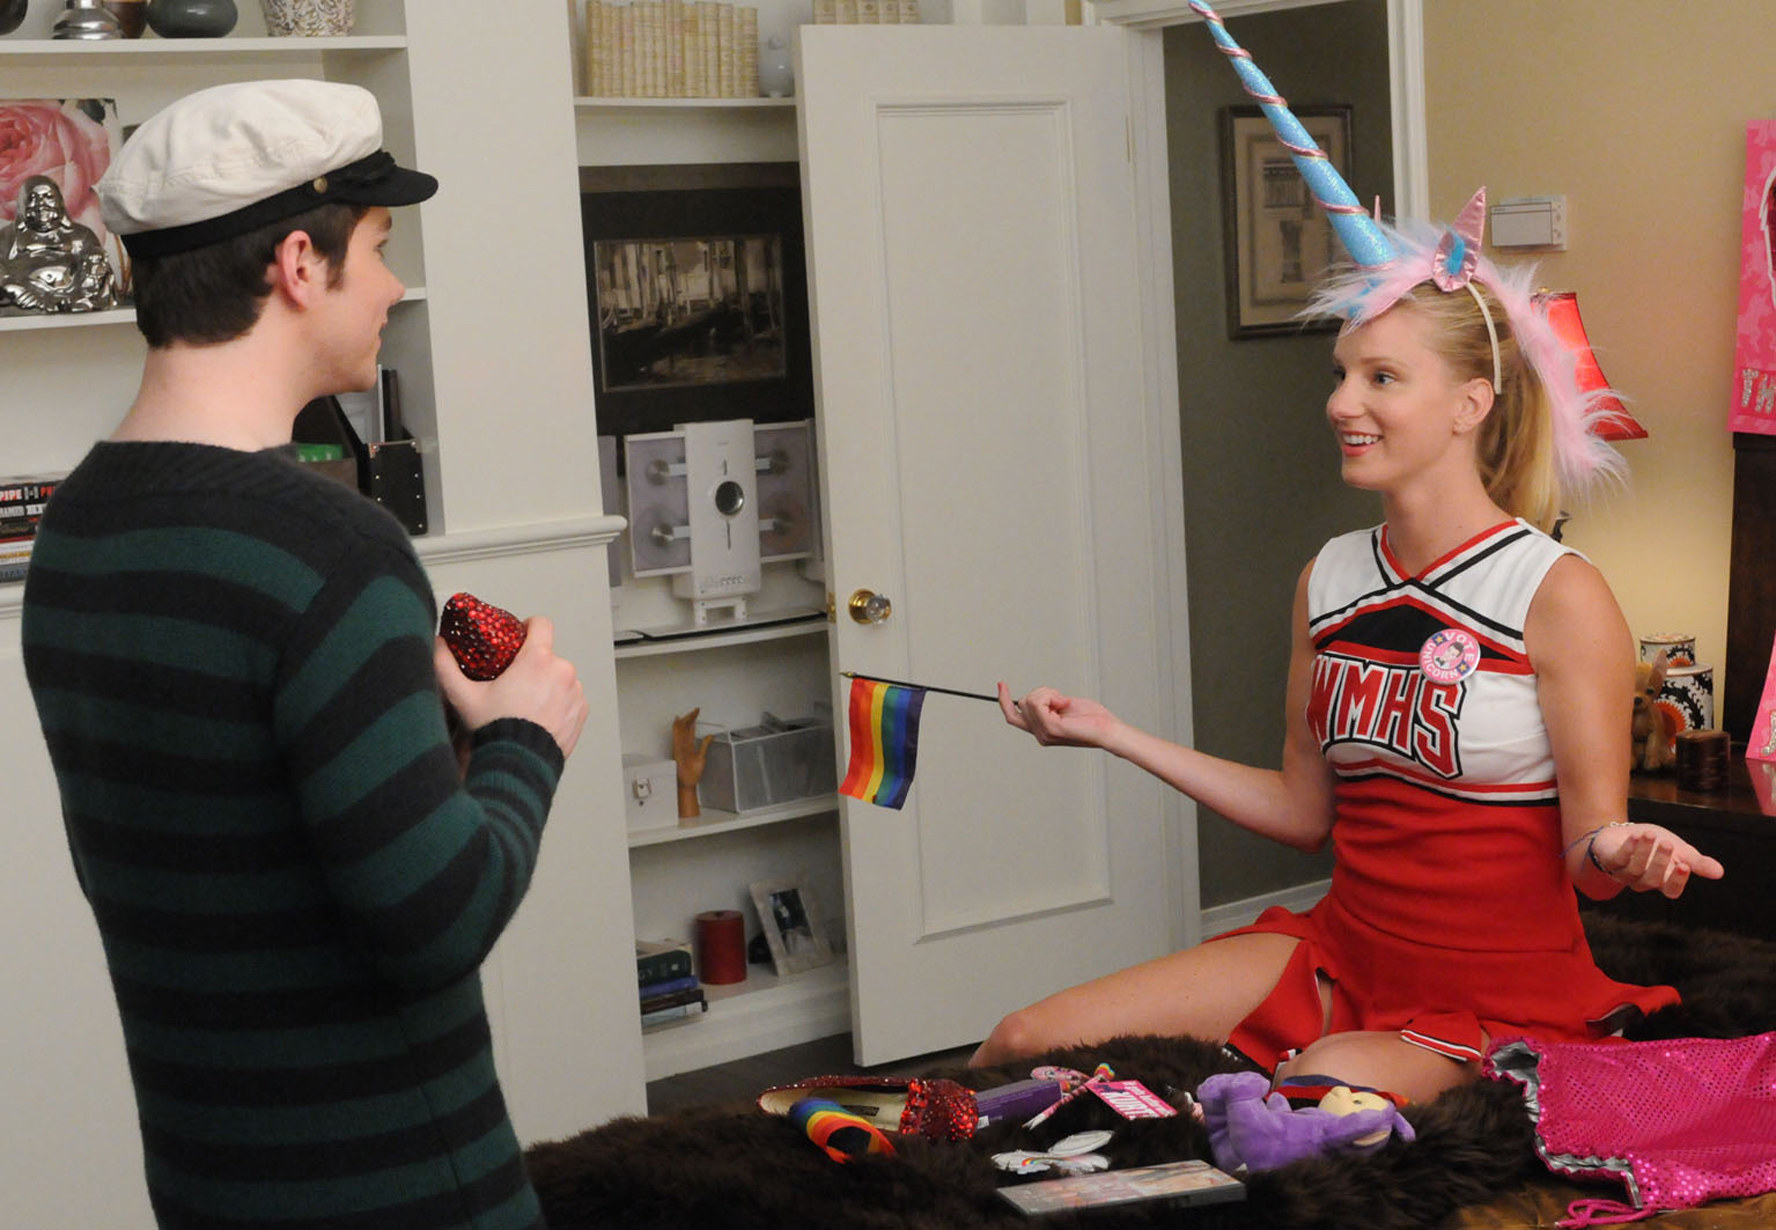 Criss and Morris in character in a room while Morris wear the cheer uniform and a unicorn horn headband